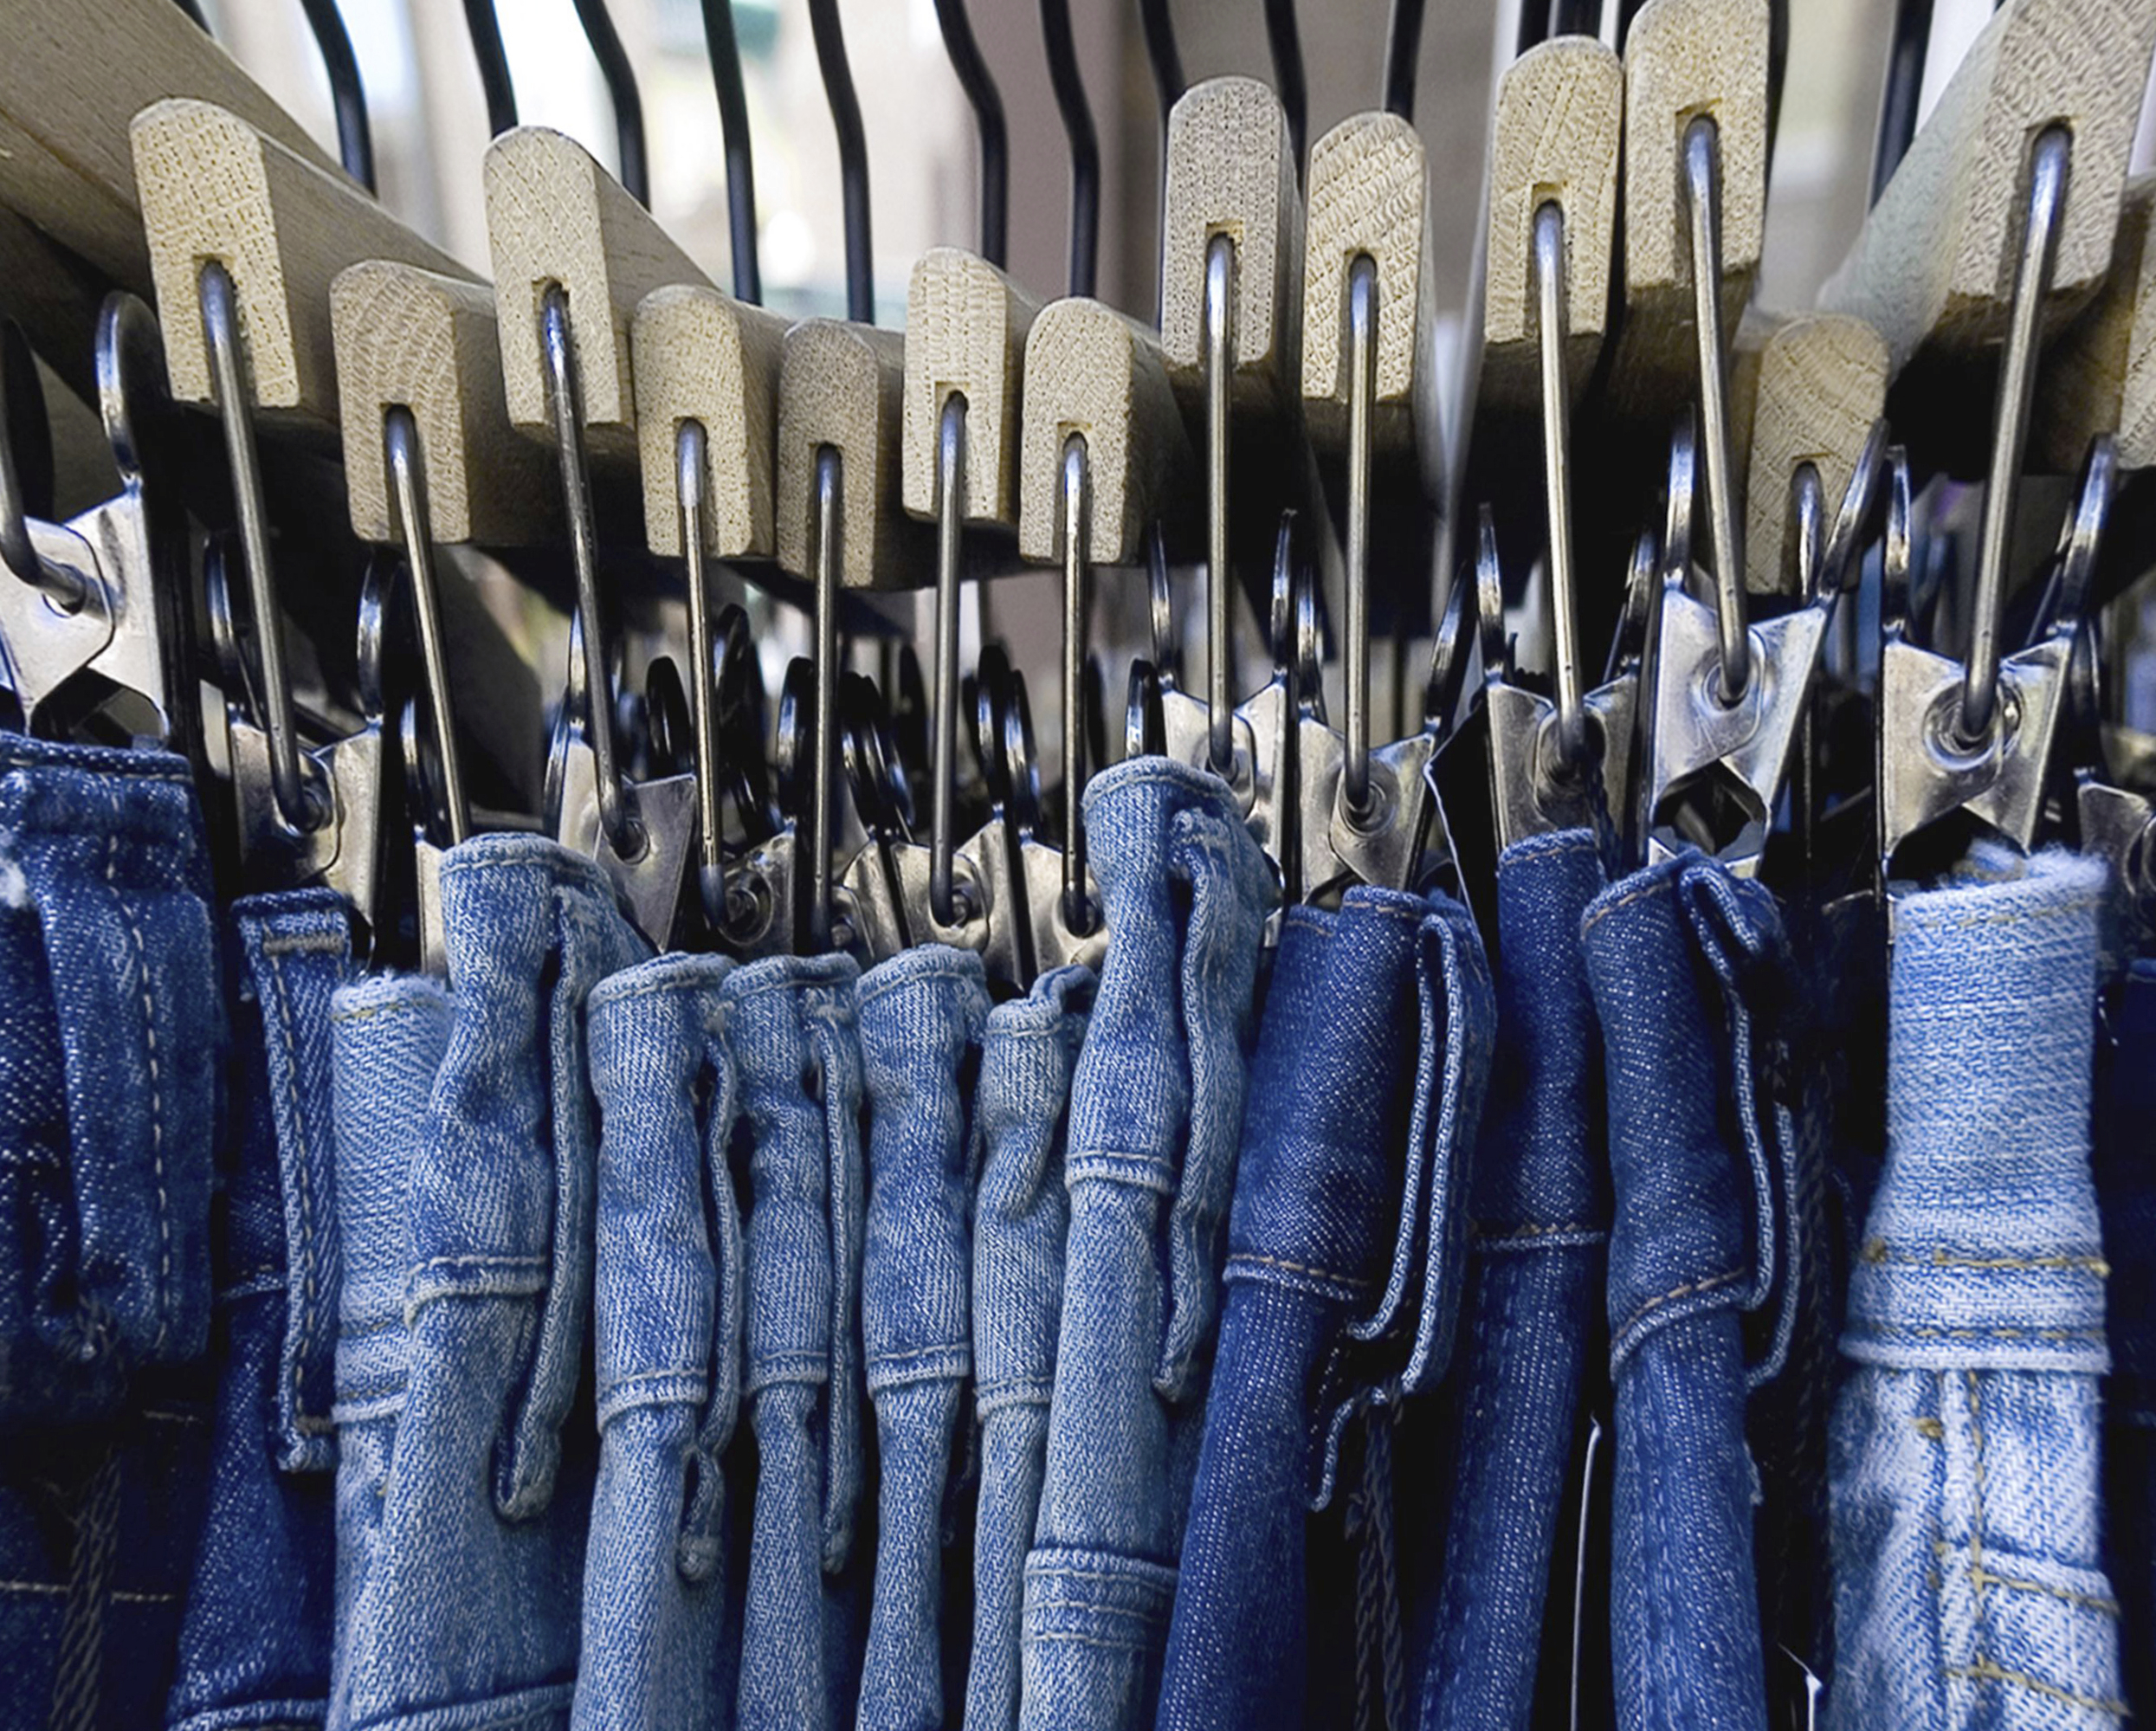 Shredded hair three What's New In Mexico's Denim Industry - Denimandjeans | Global Trends, News  and Reports | Worldwide